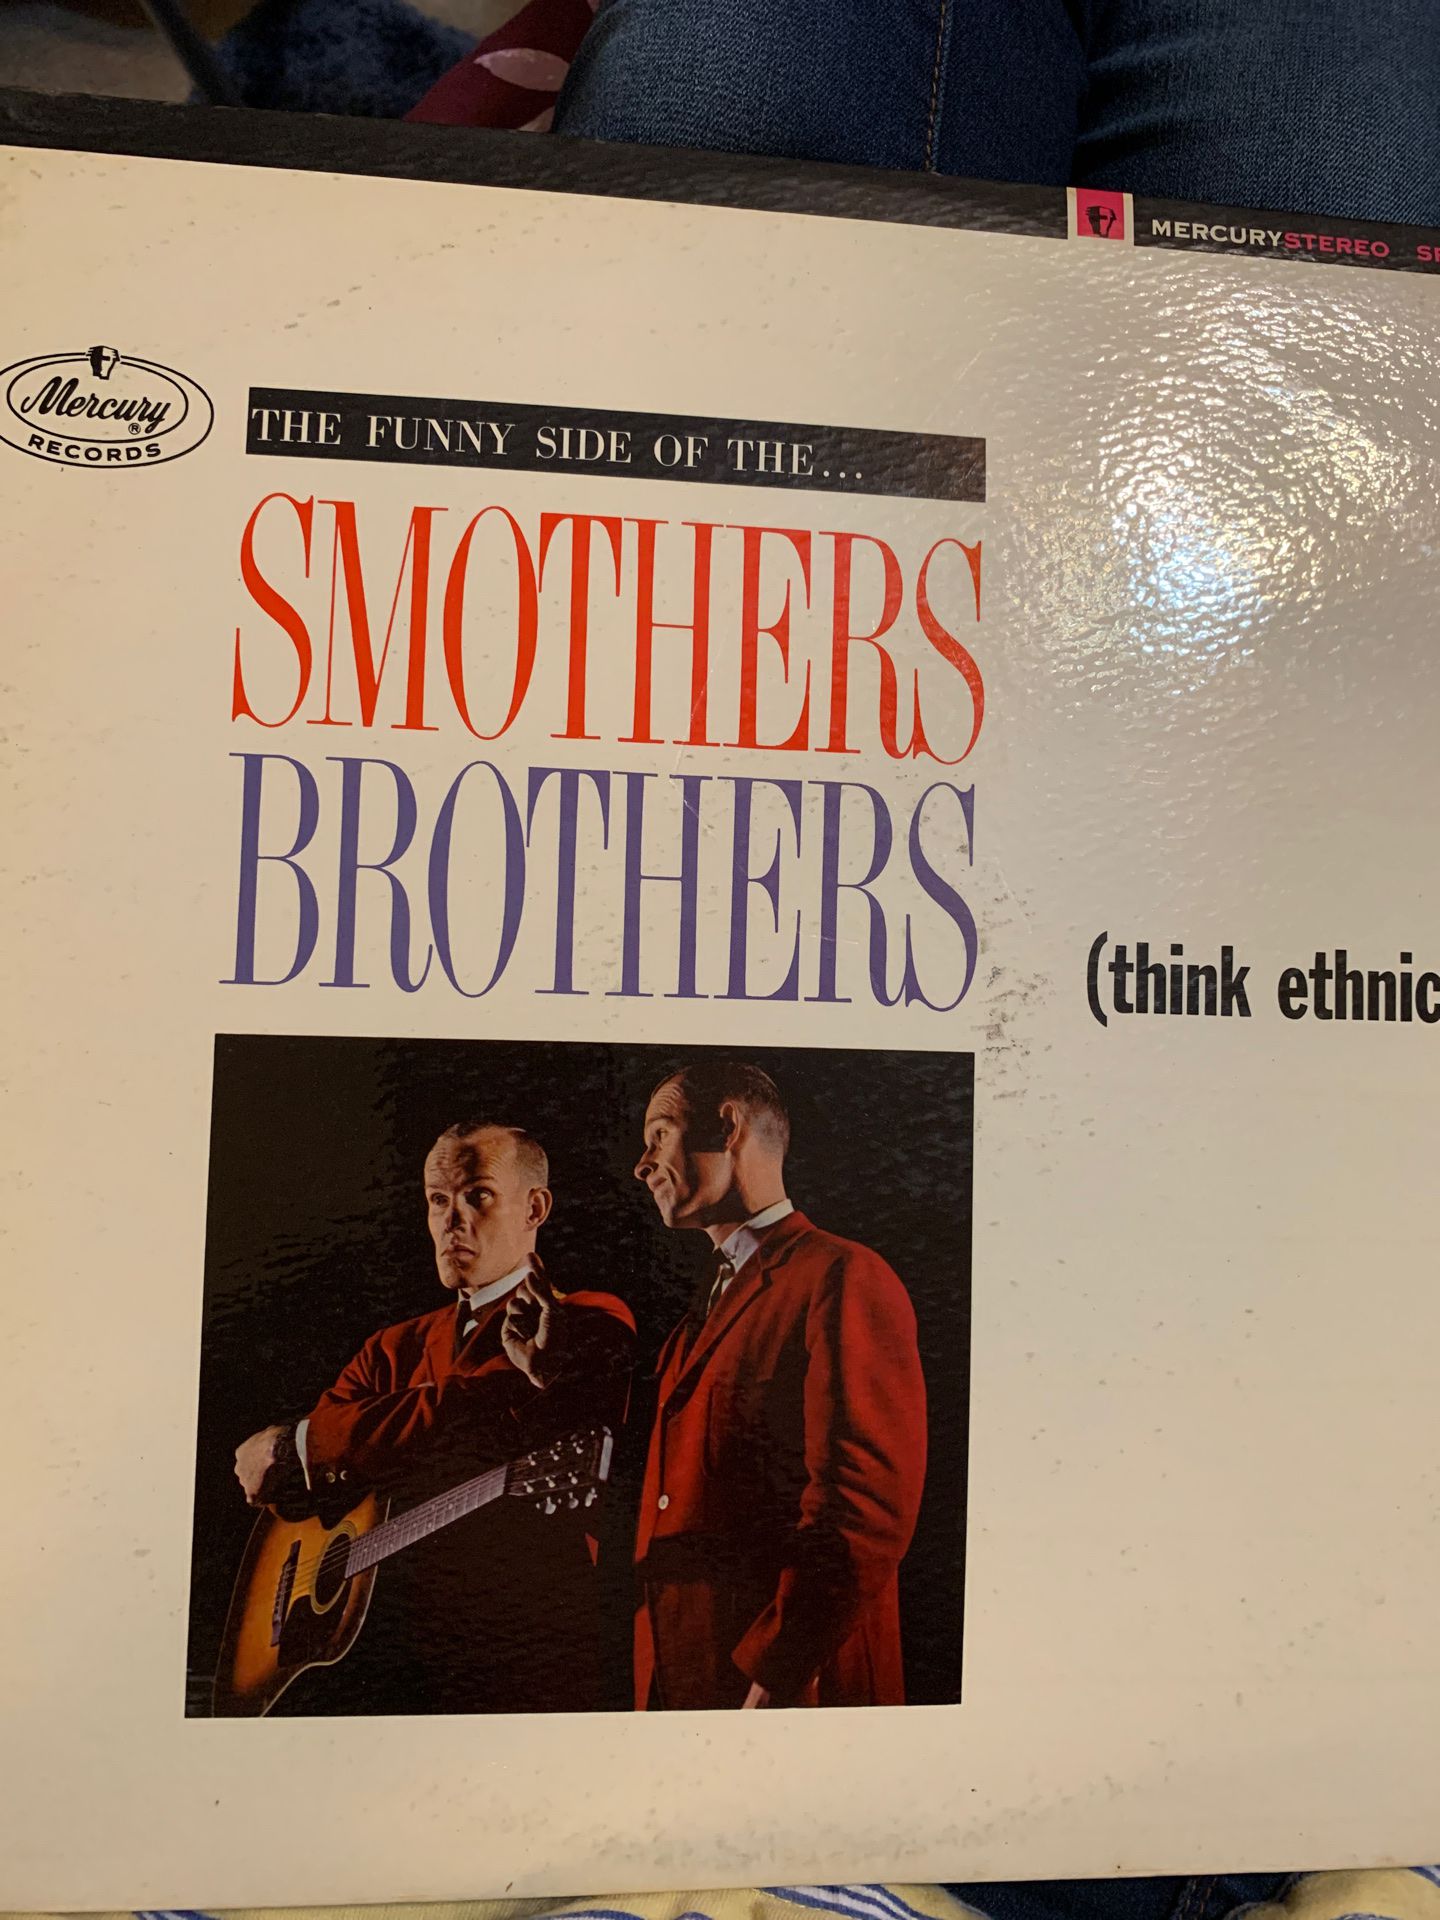 Smothers brothers vinyl record